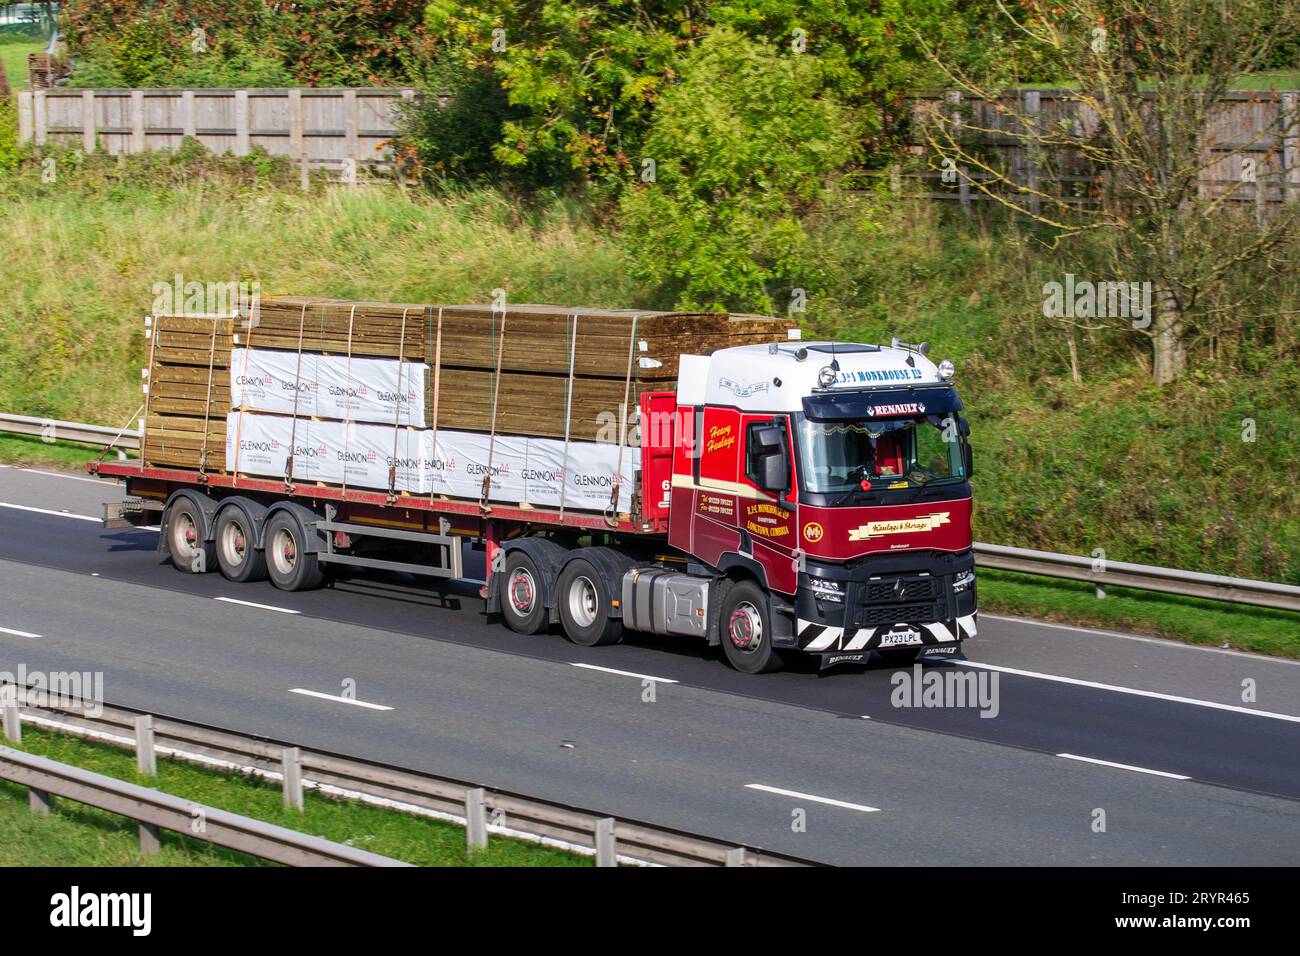 R J & I MONKHOUSE LTD a haulage transport company based in  Carlisle transporting Glennon Timber machined products on flatbed Renault 480.26 6x2 TML red 12777cc truck; travelling at speed on the M6 motorway in Greater Manchester, UK Stock Photo